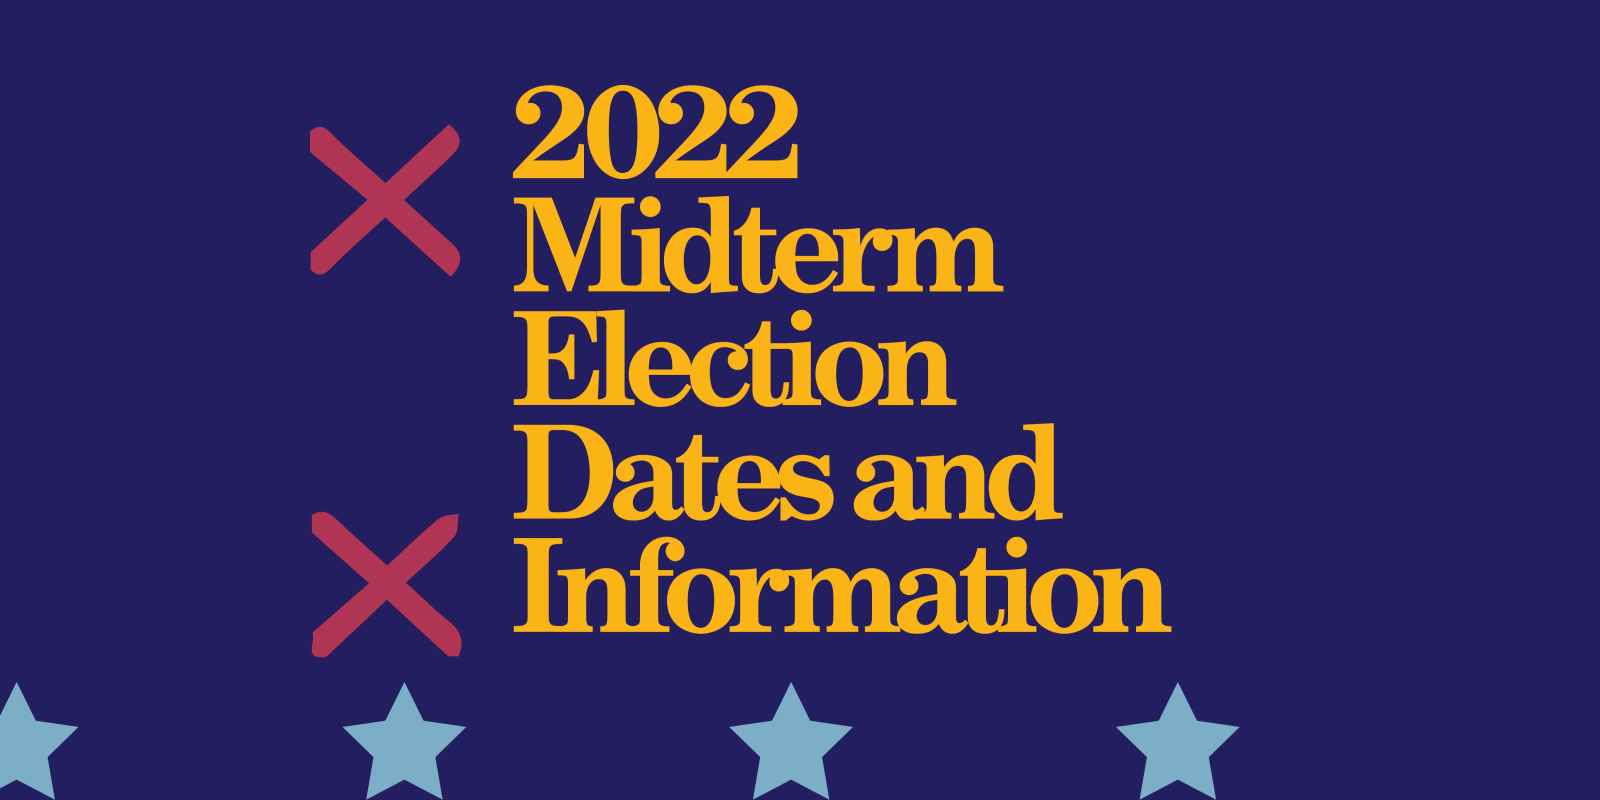 2022 Midterm Election Dates and Information 